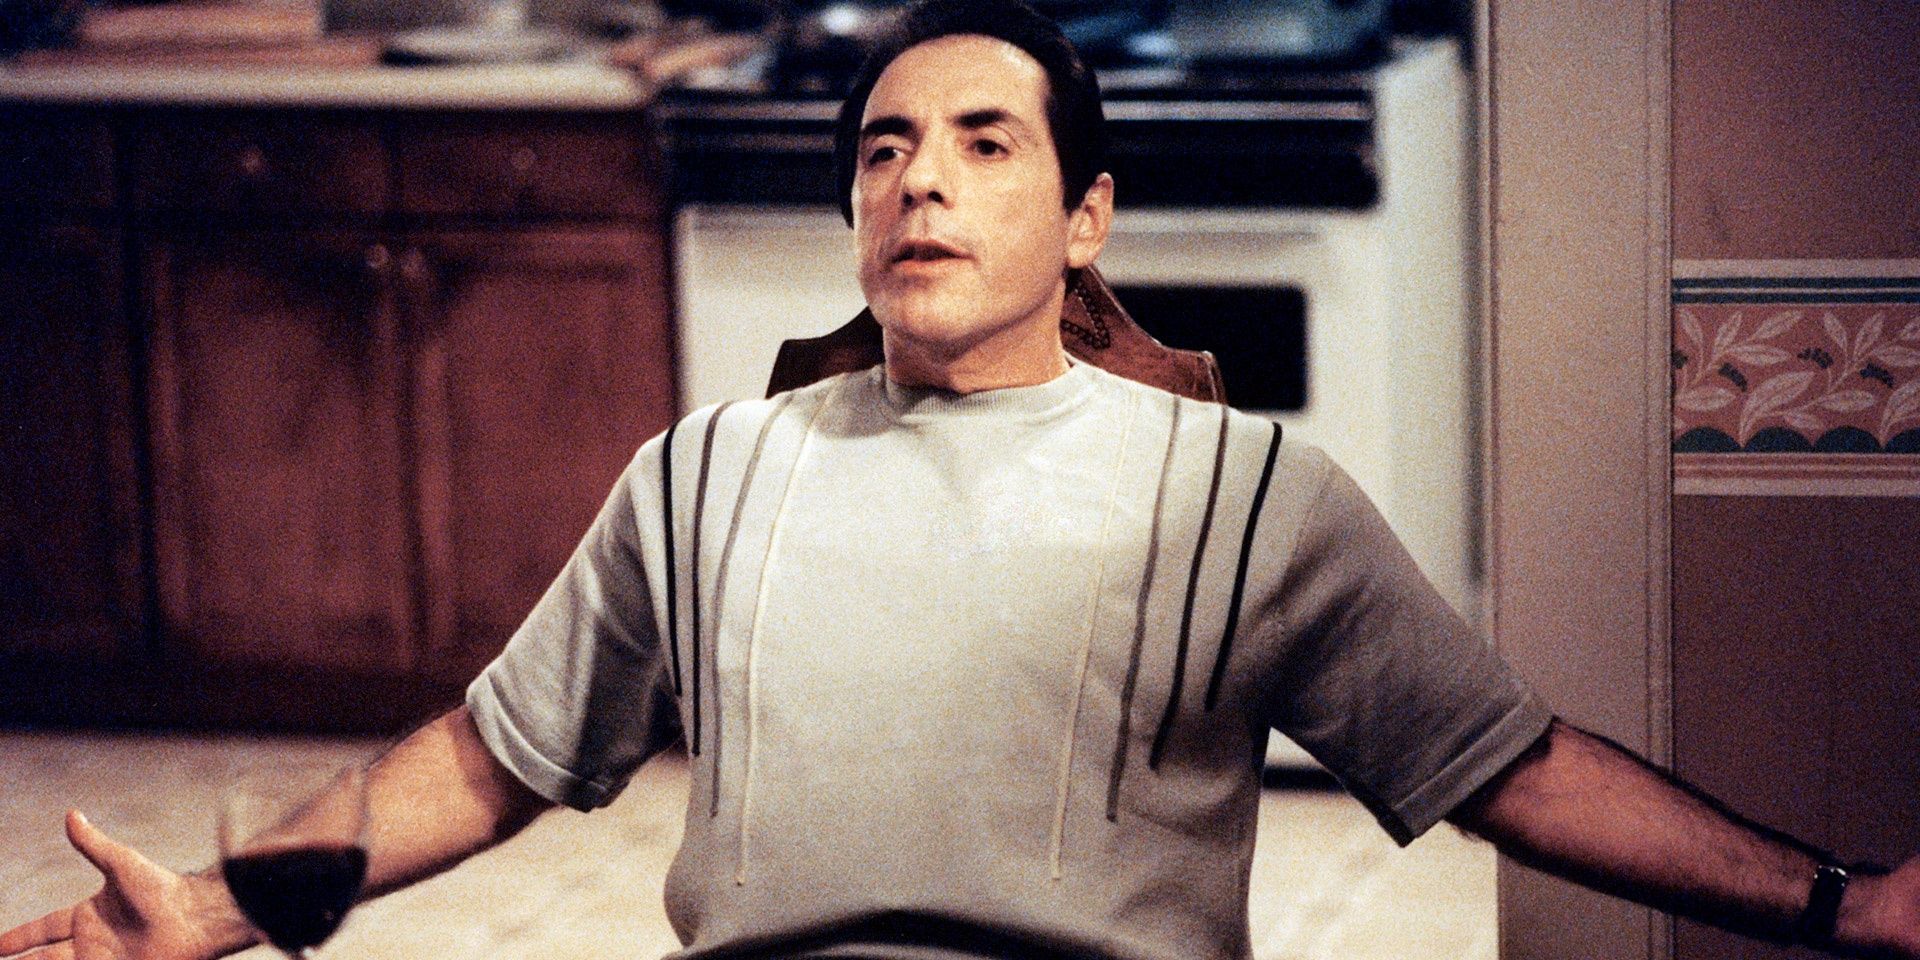 The Sopranos: Richie Aprile sitting with his arms wide